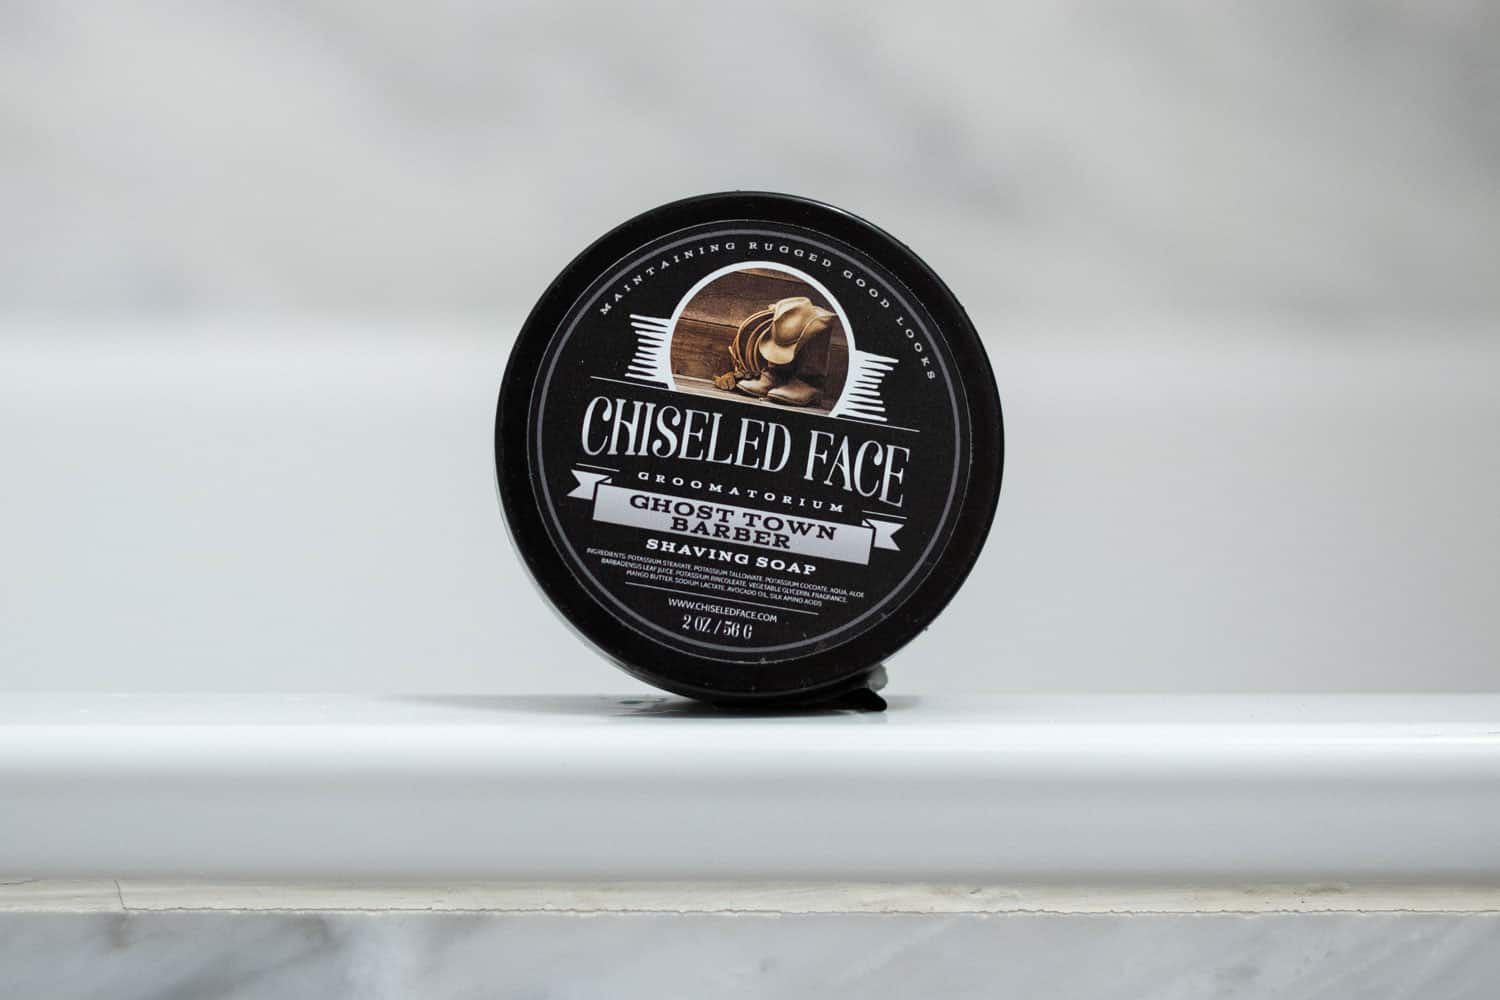 chiseled face ghost town barber shave soap on bath ledge